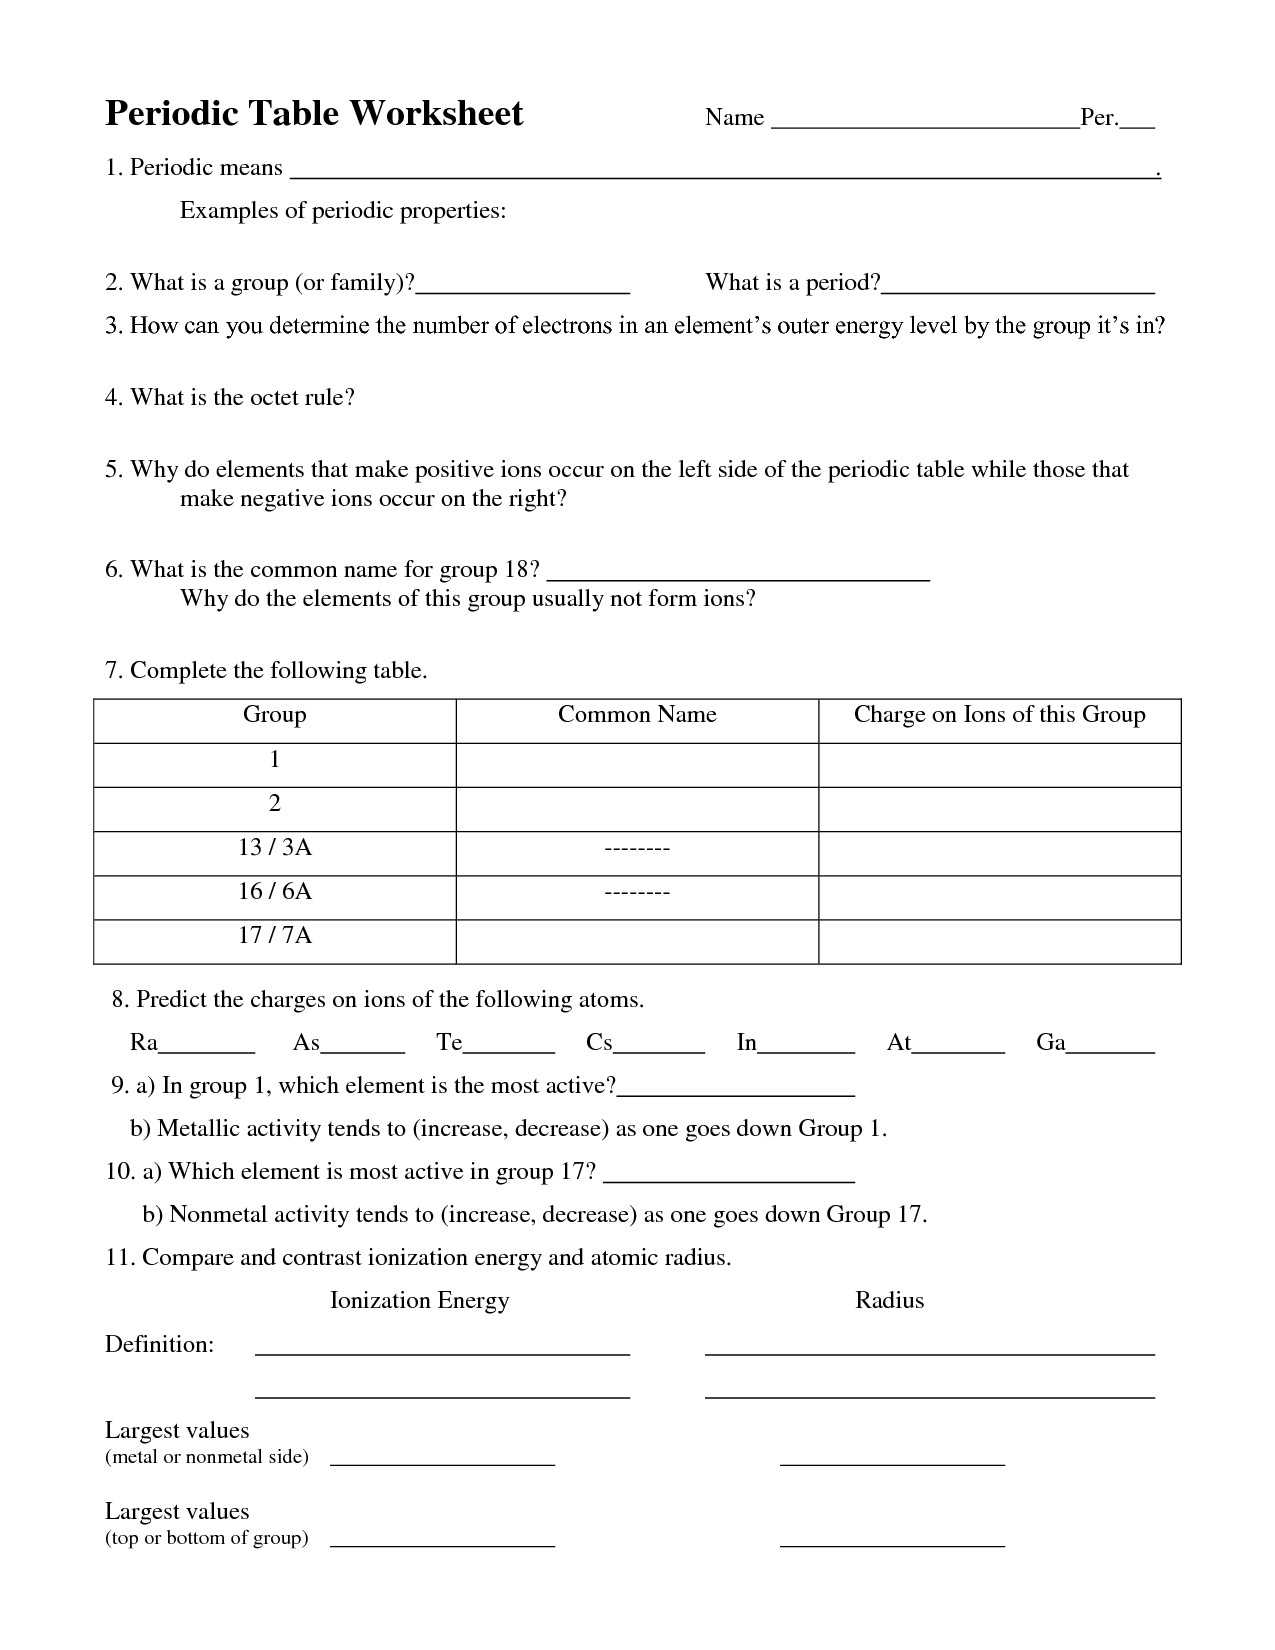 Introduction to Periodic Table Lab Activity Worksheet Answer Key or Valid Periodic Table Named Groups Worksheet 2